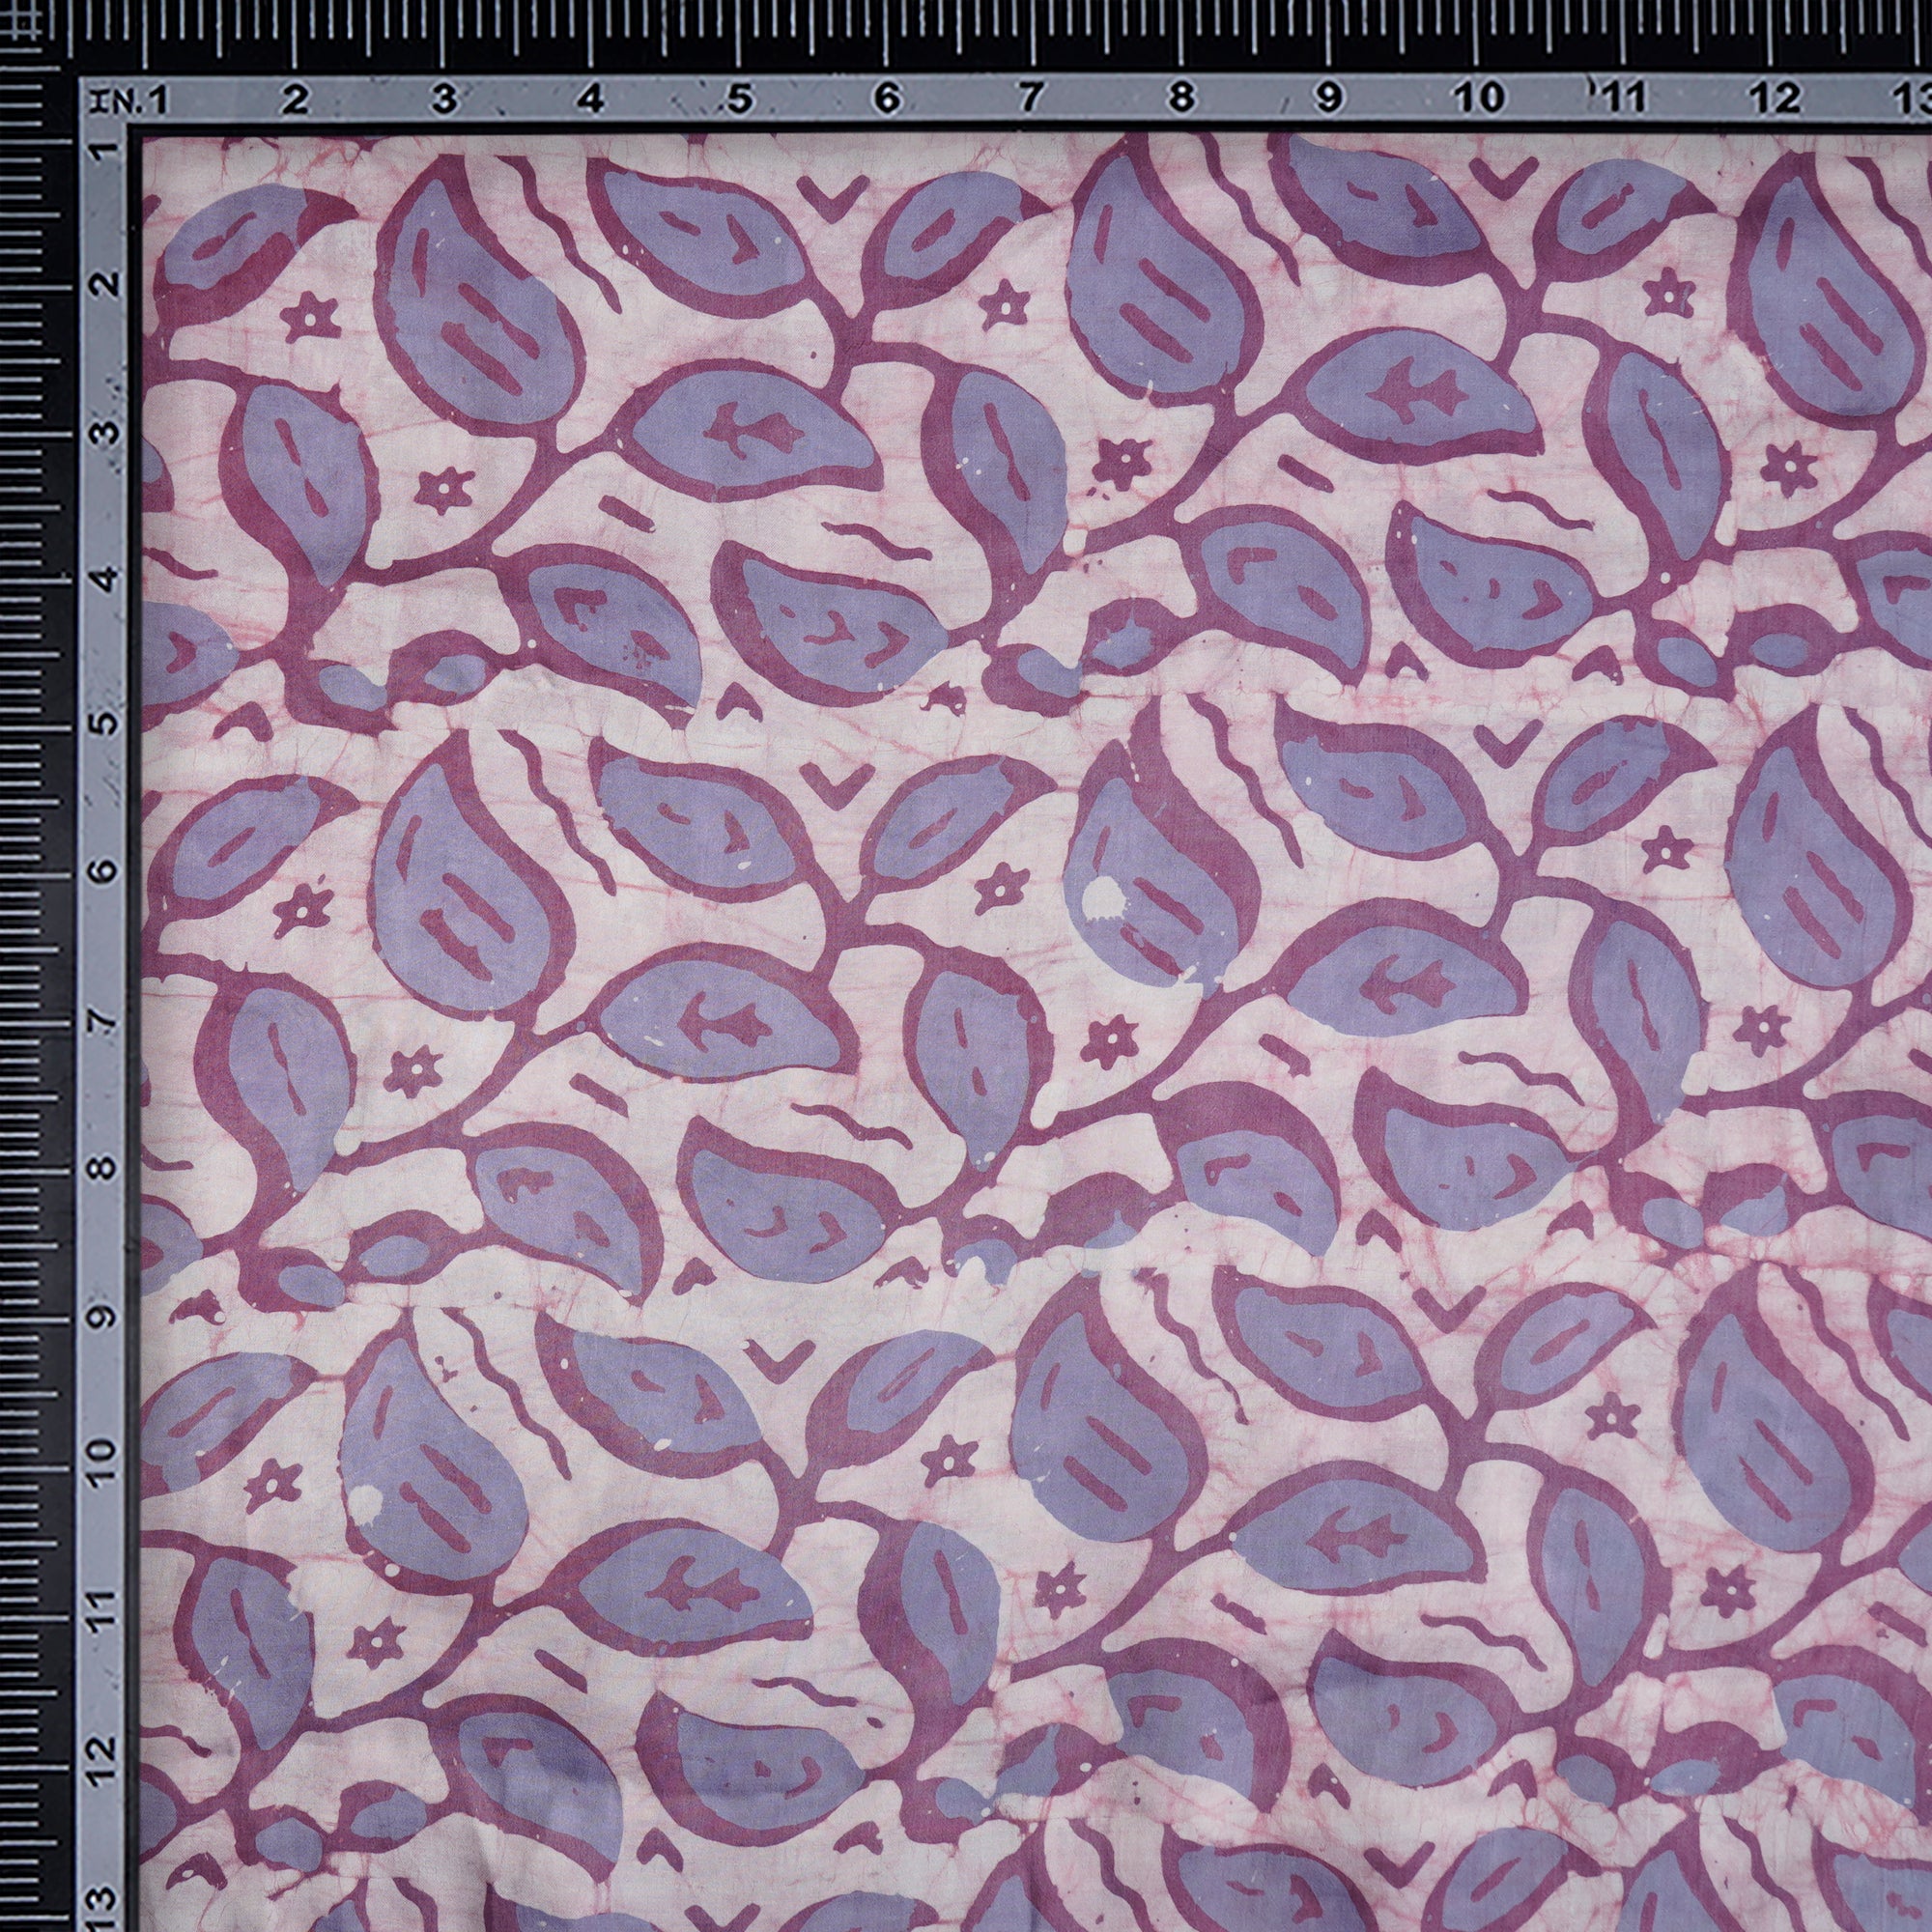 Lavender Handcrafted Waxed Batik Printed Modal Fabric